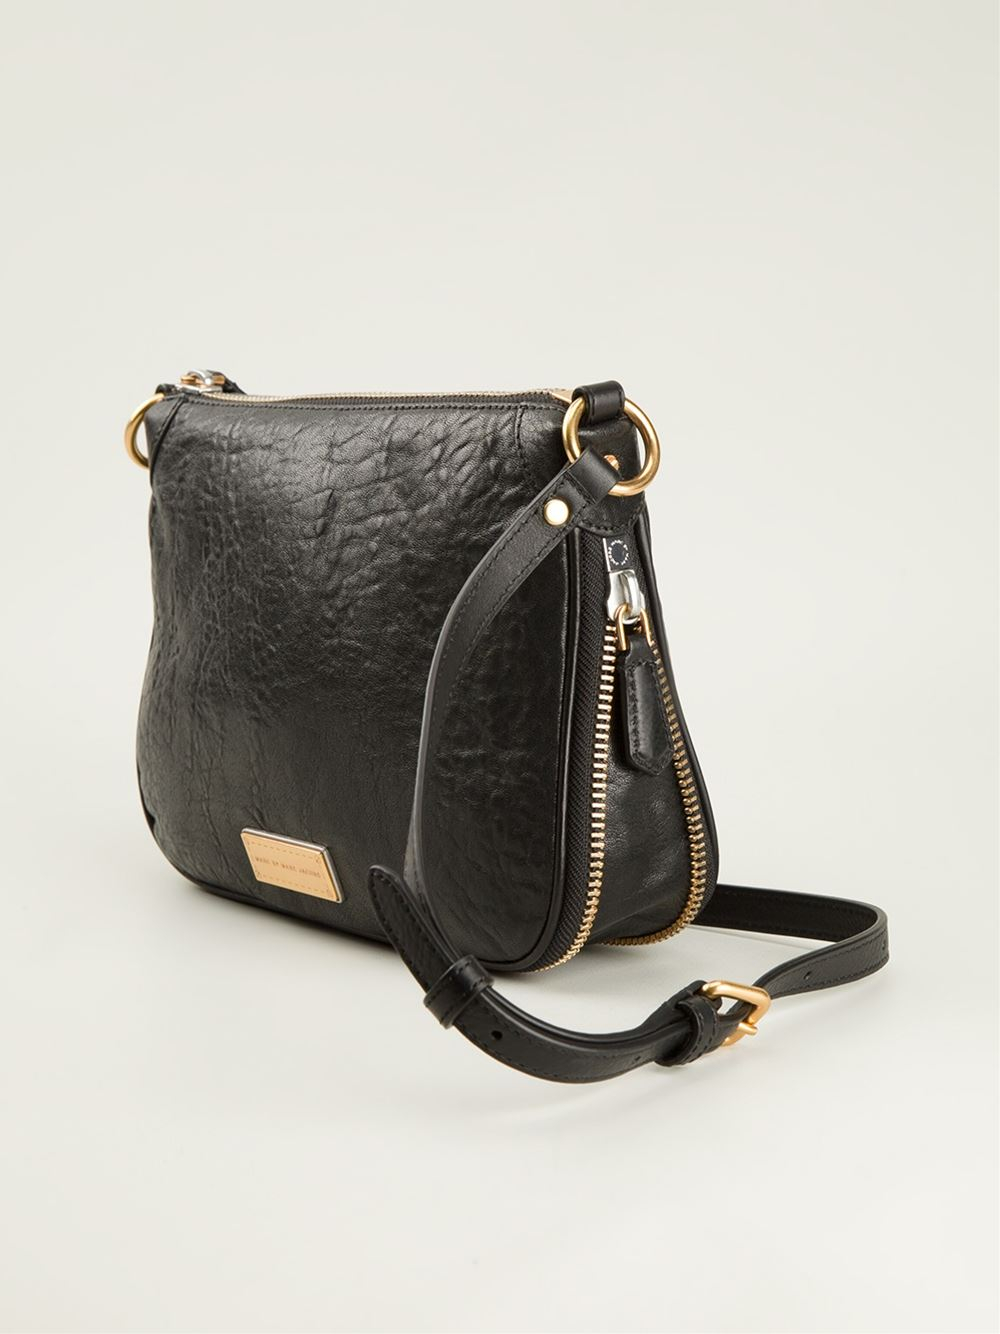 Lyst - Marc By Marc Jacobs Washed Up Nash Cross Body Bag in Black